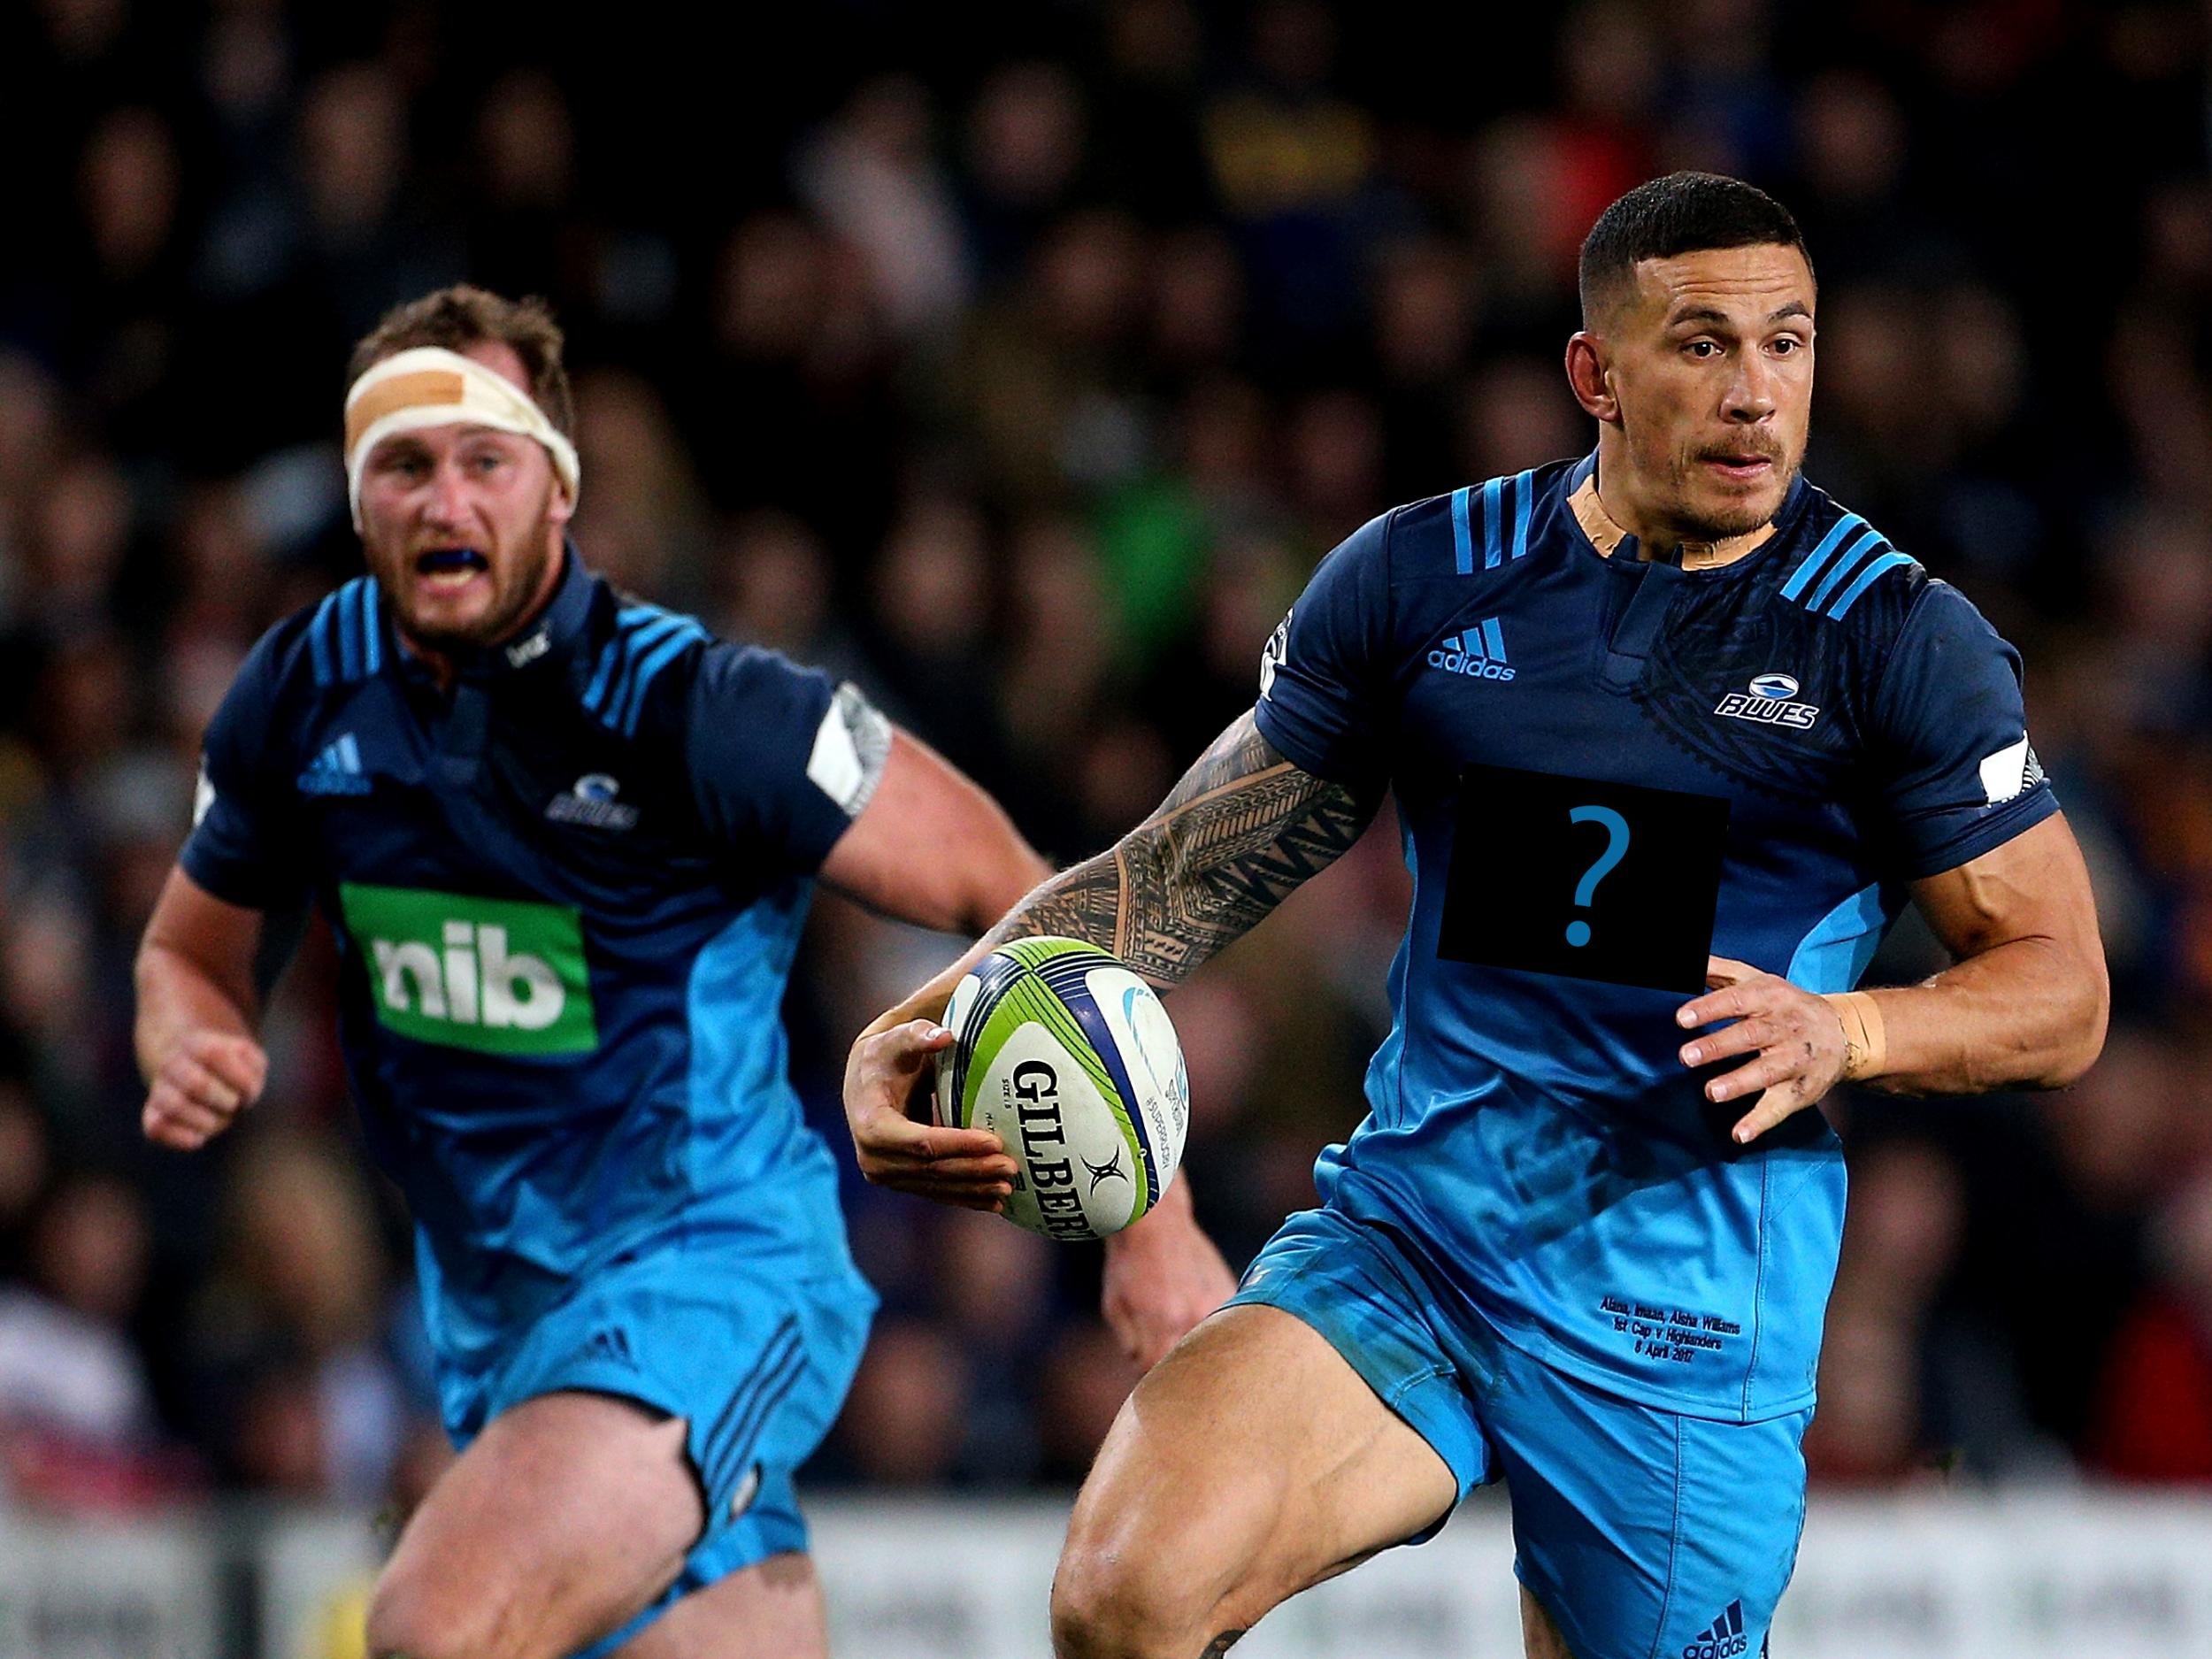 Sonny Bill Williams gets backing from New Zealand Rugby in religious stand against Auckland Blues kit - The Independent